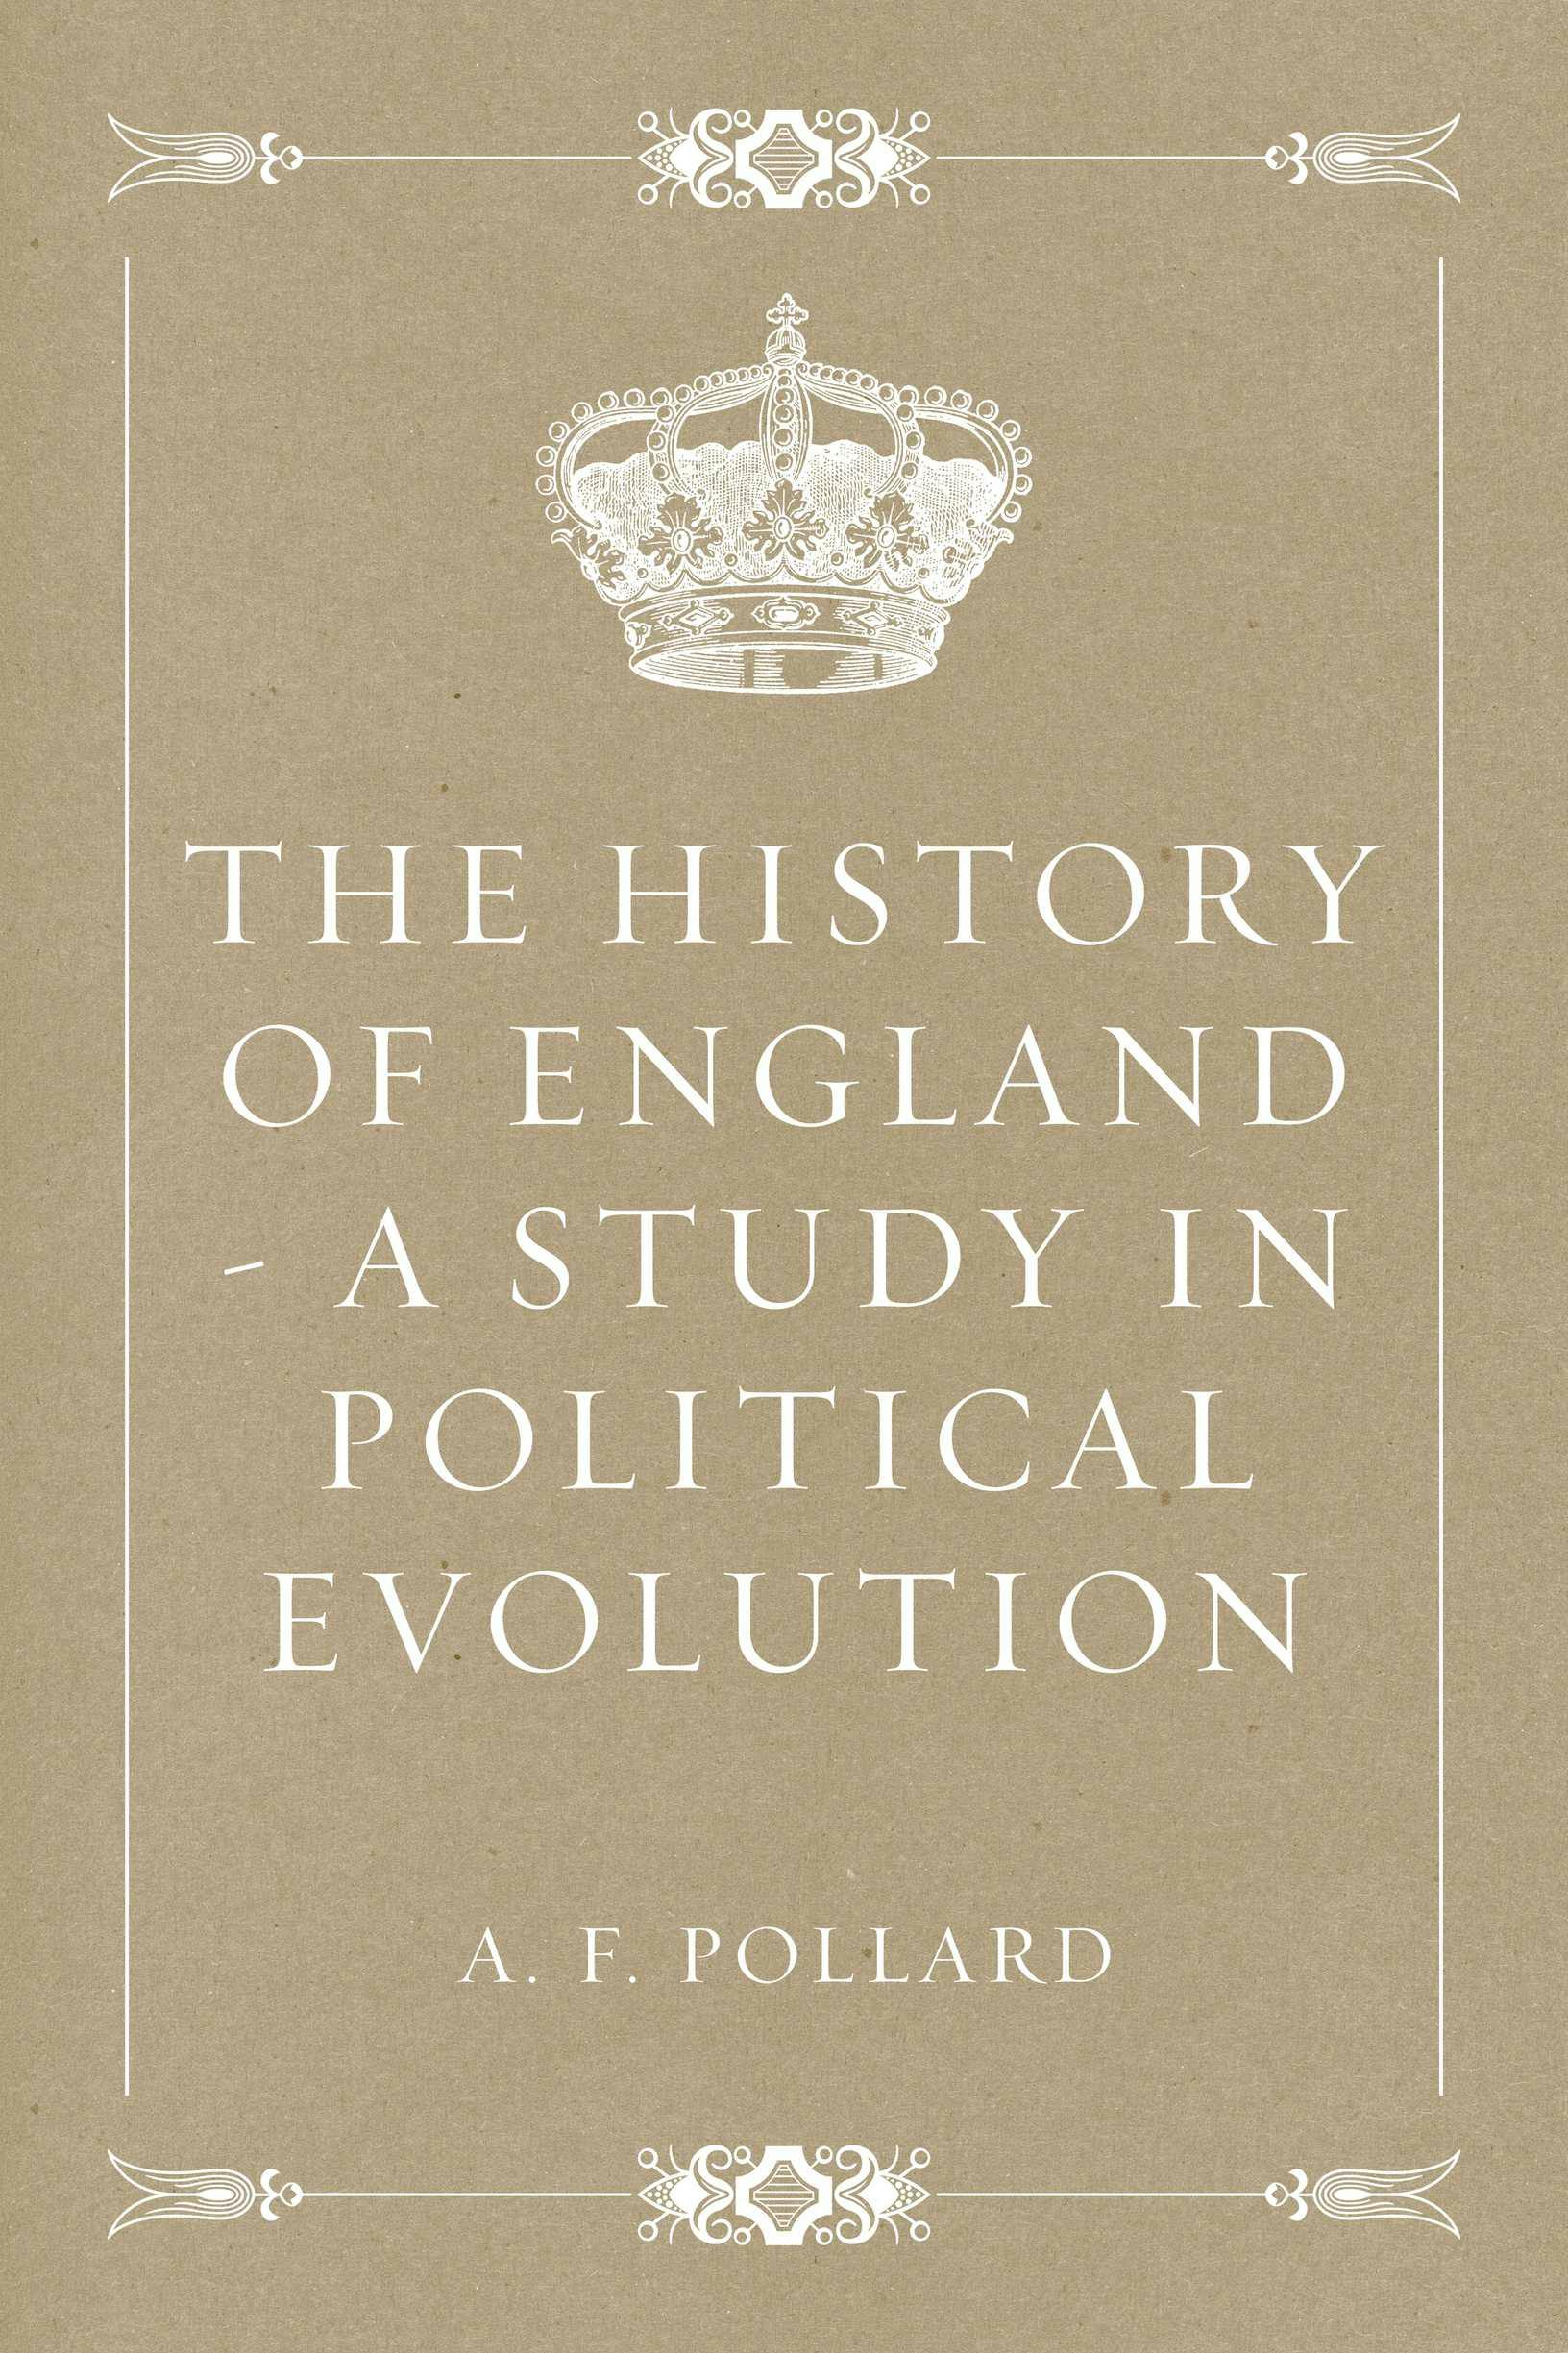 The History of England - a Study in Political Evolution - A. F. Pollard